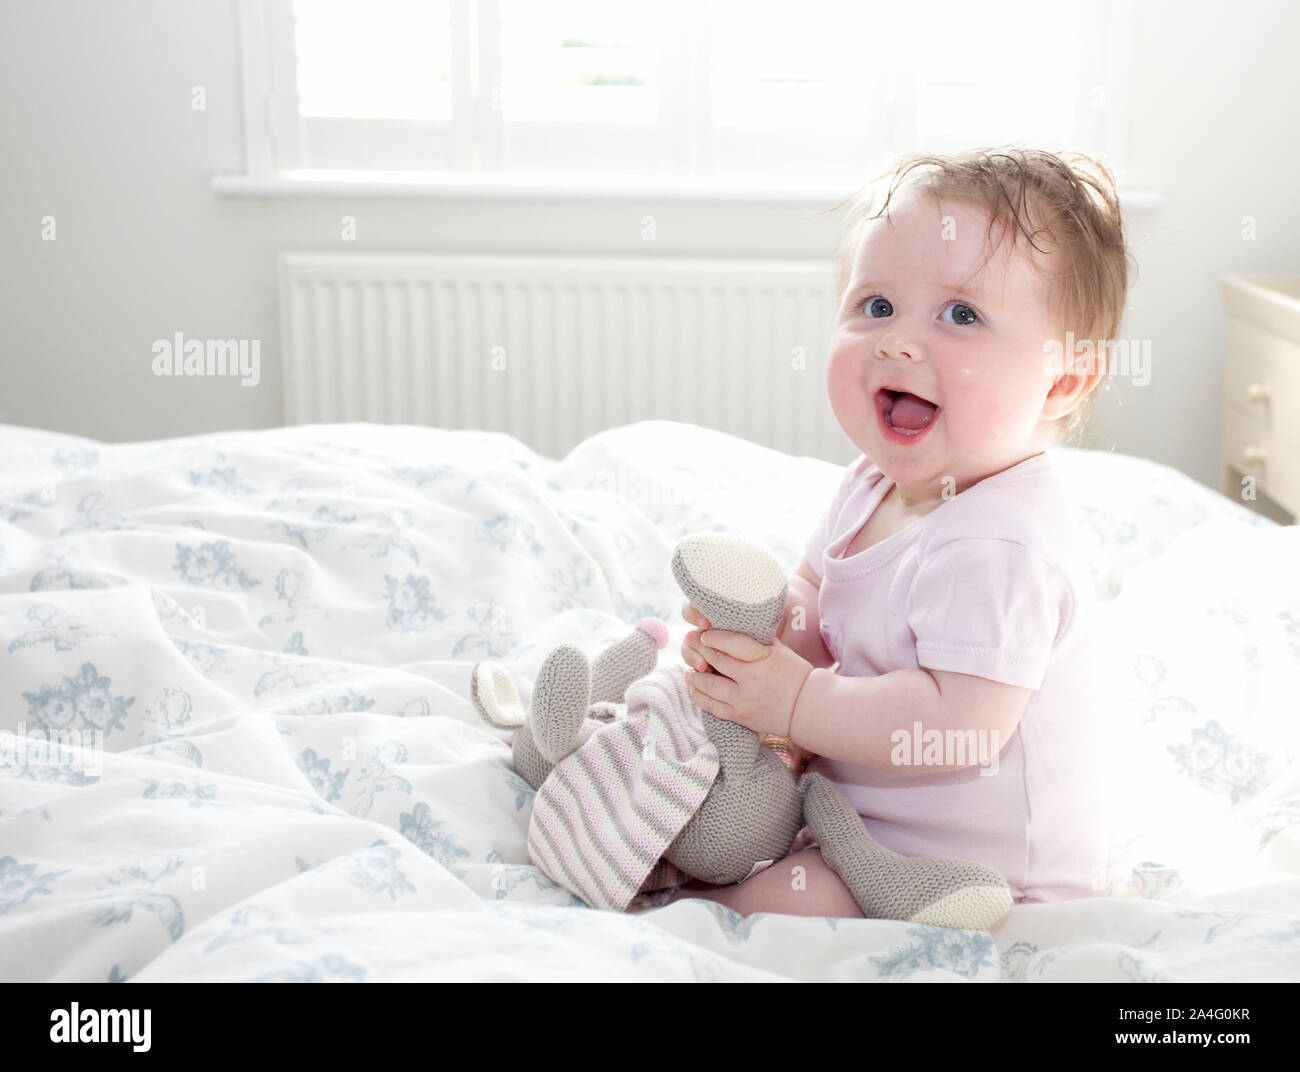 Baby sat on bed smiling for camera Stock Photo